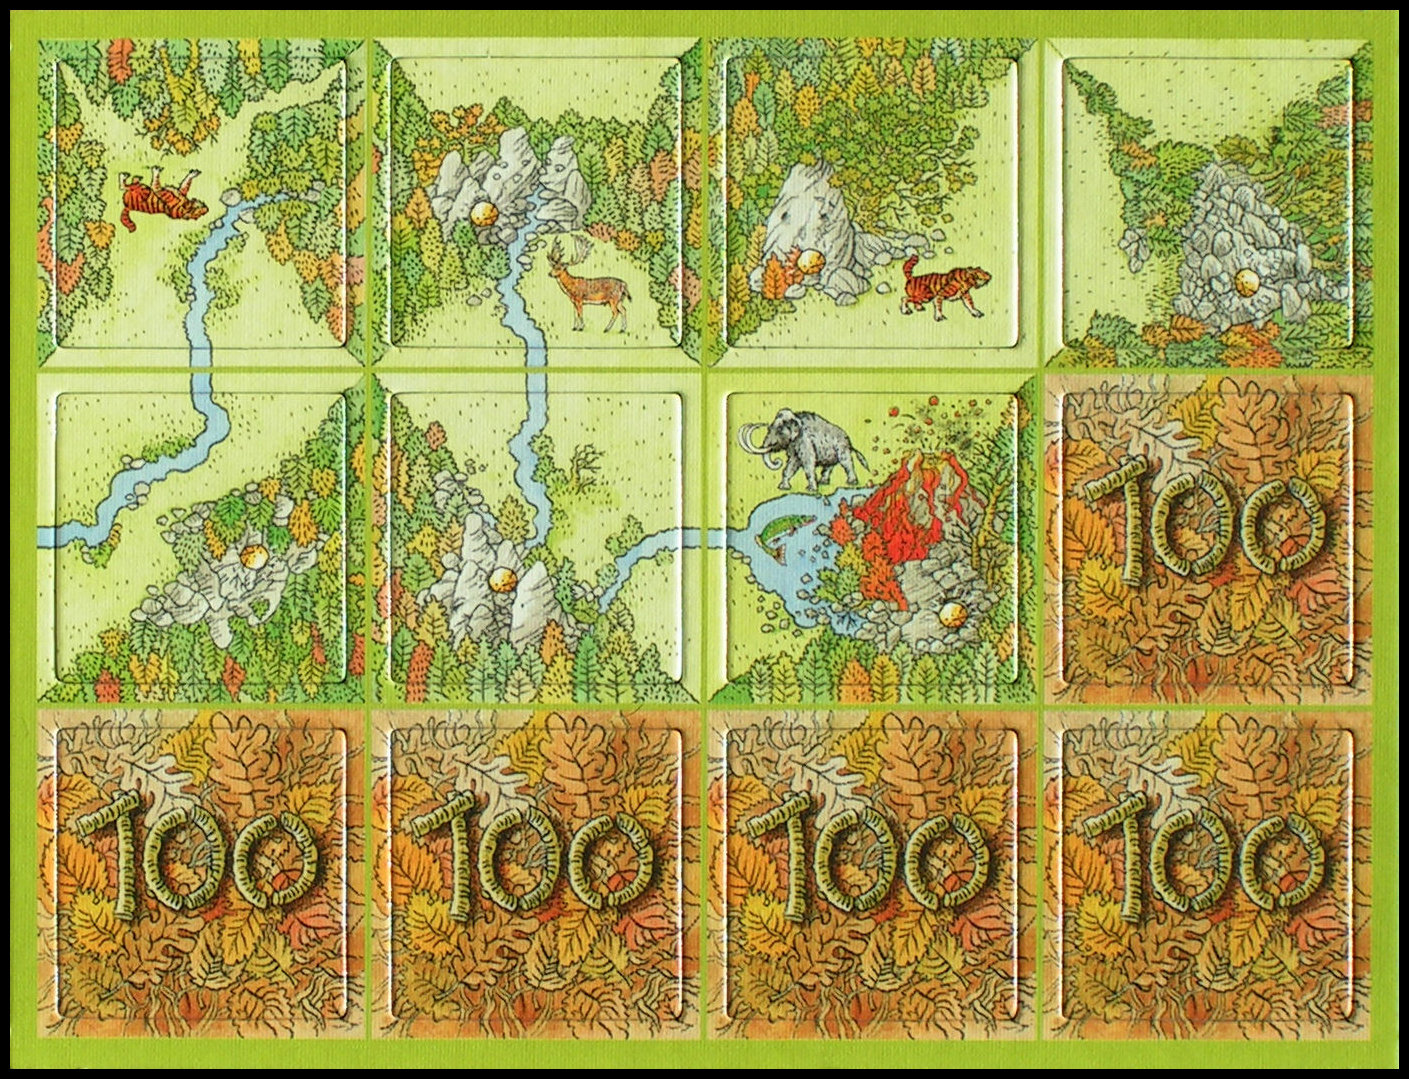 Carcassonne: Hunters And Gatherers - Tileset With Score Tiles